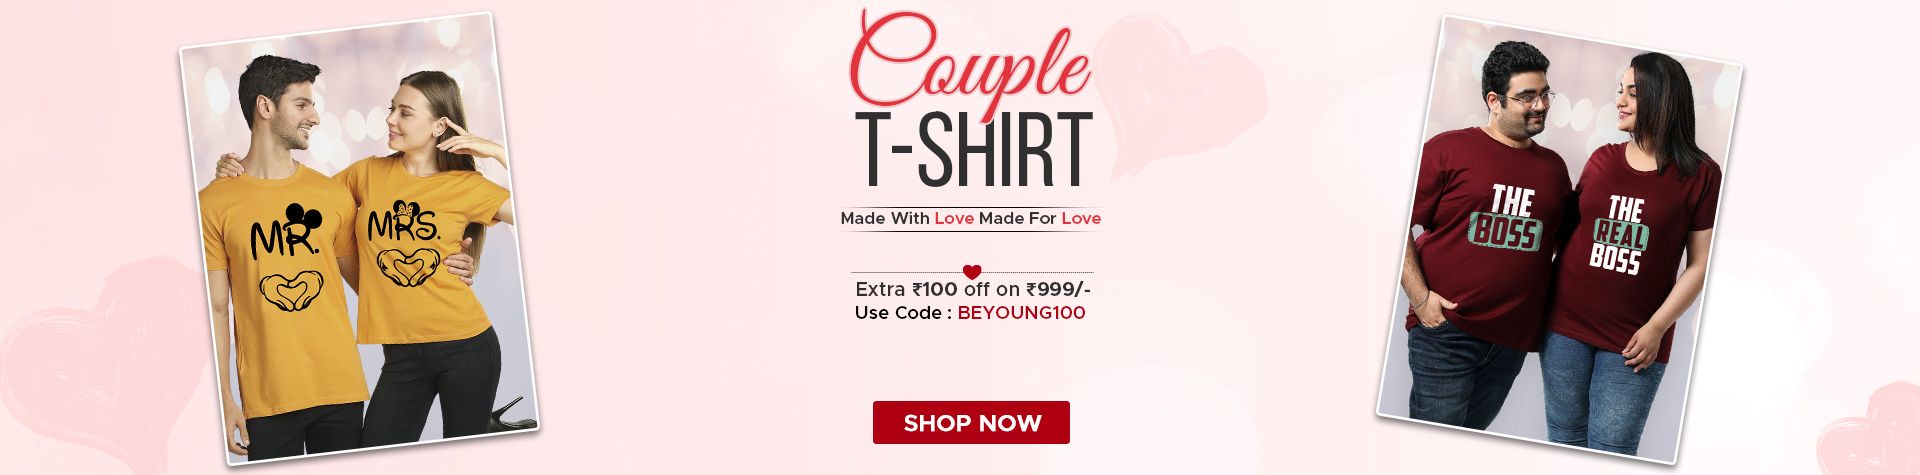 customize shirts for couples